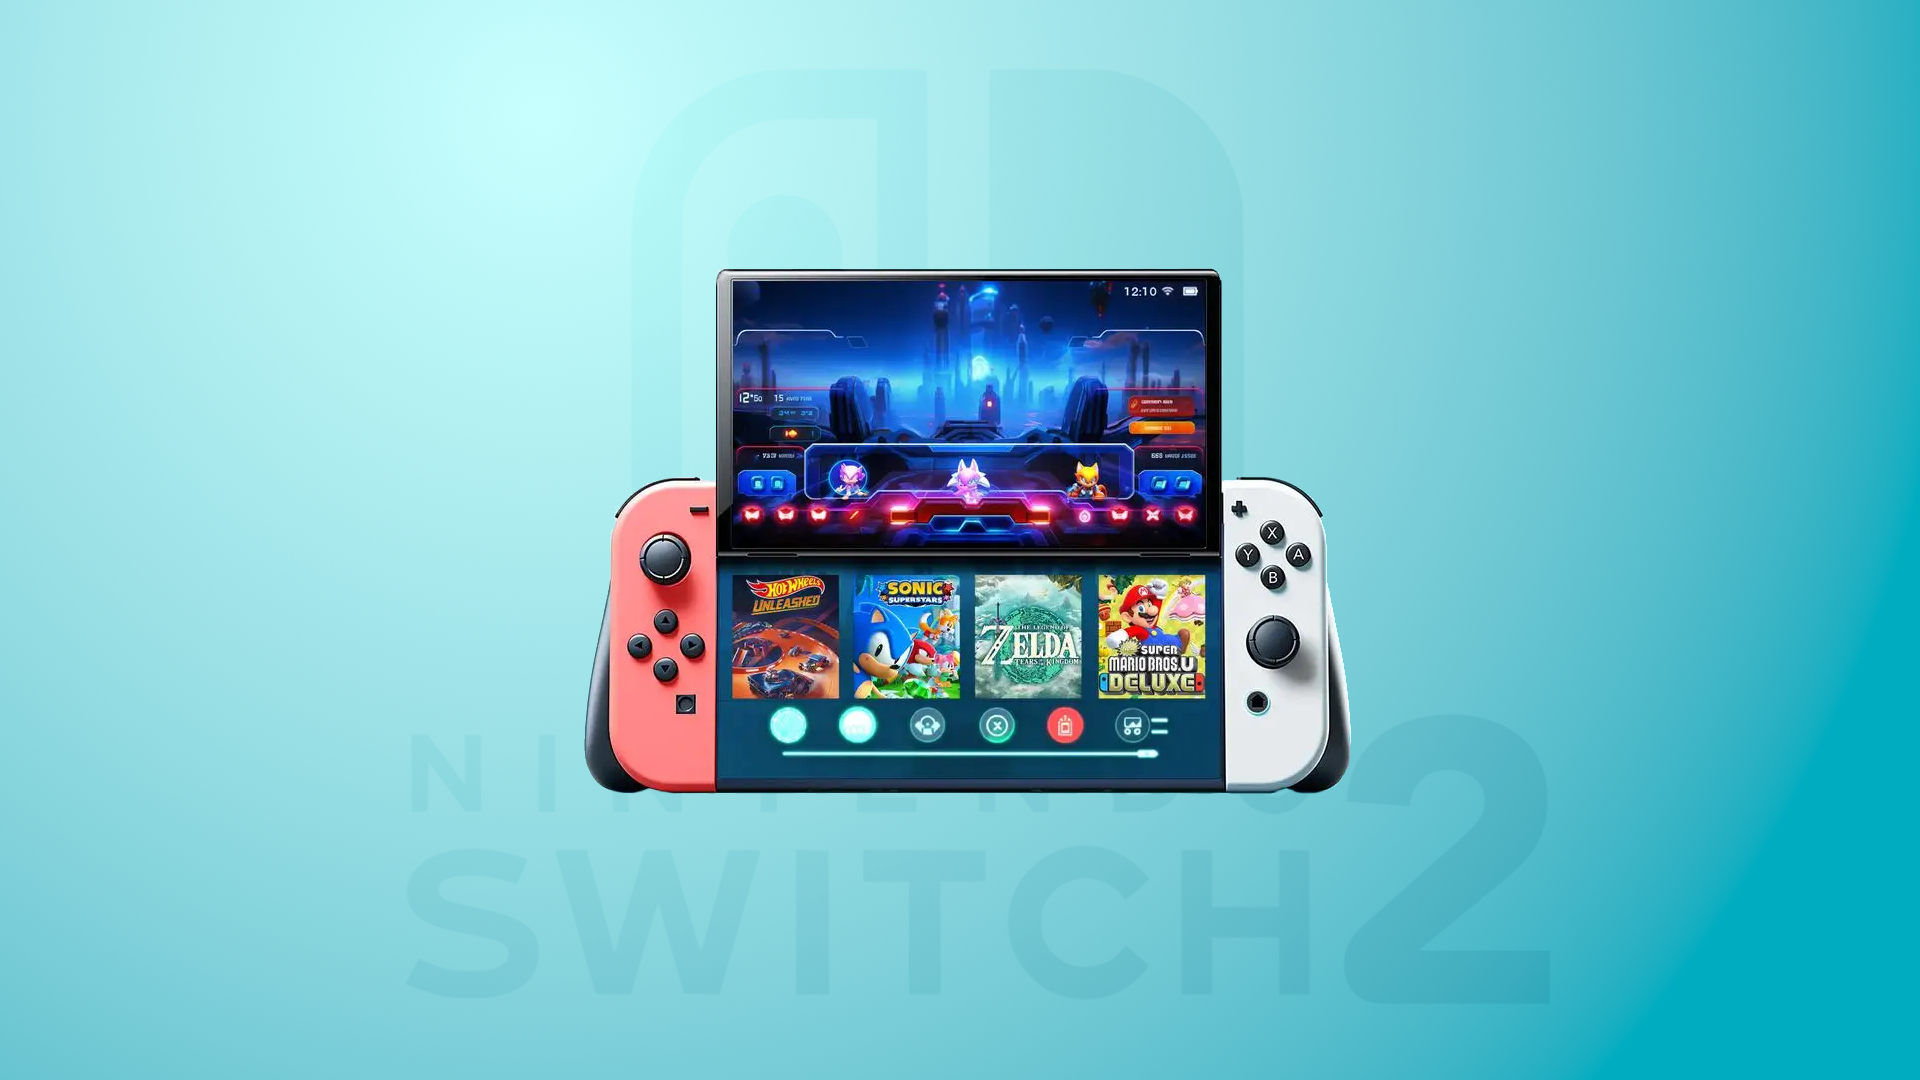 Nintendo Switch 2 specs - Nintendo's console is more powerful than